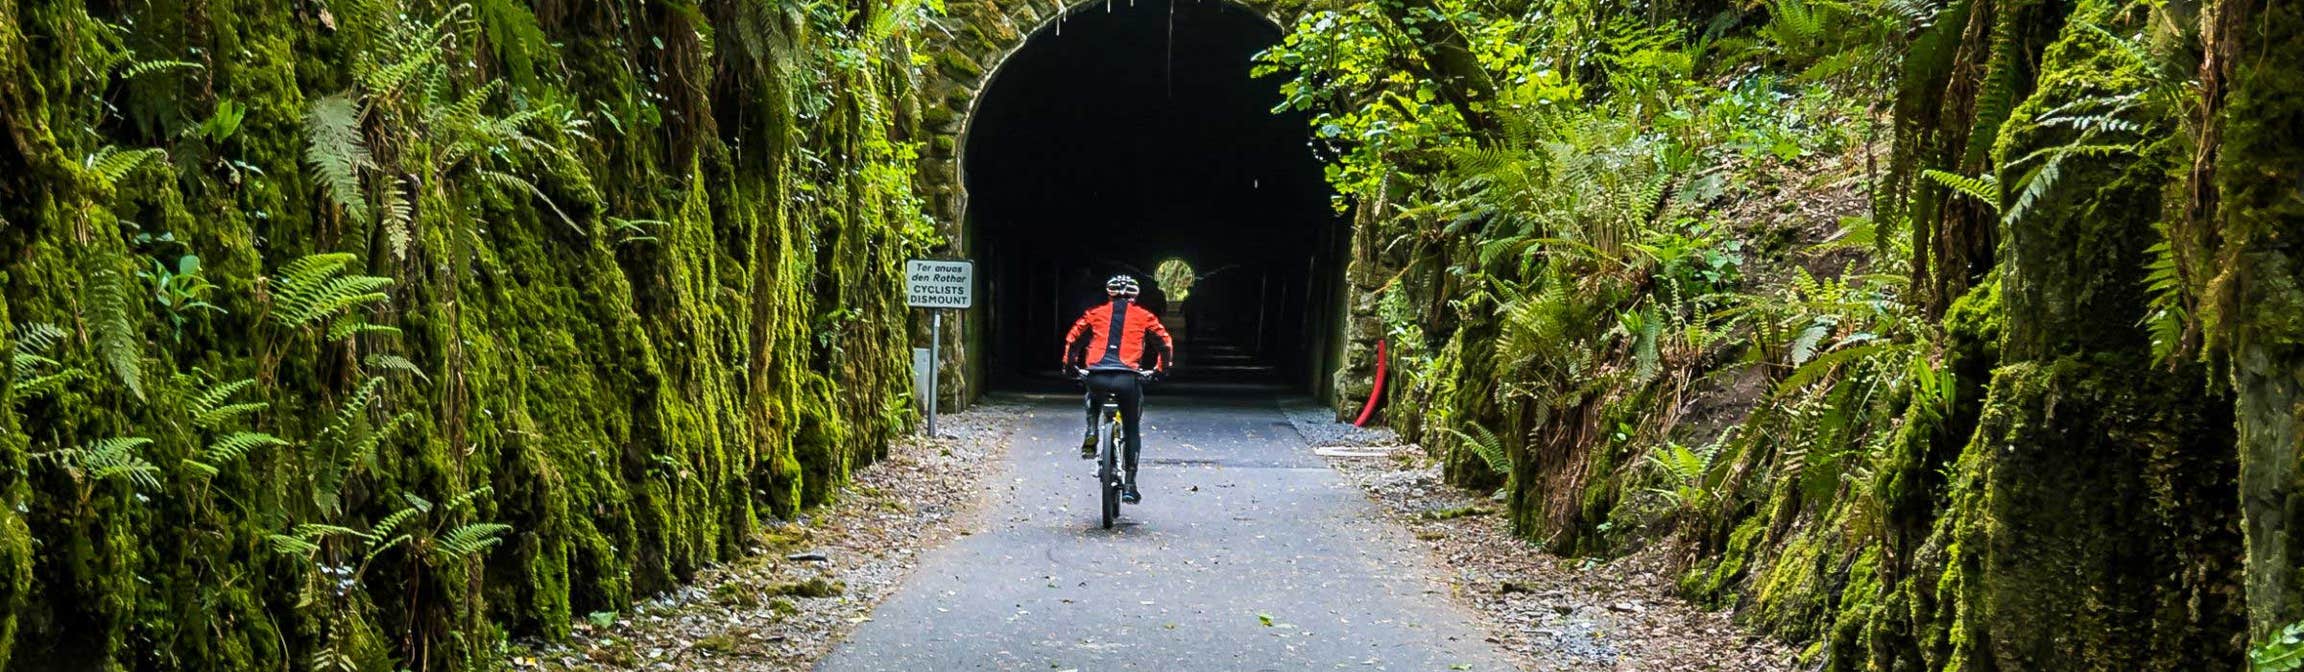 Cyclist about to enter Ballyvoyle Tunnel, Waterford Greenway, County Waterford